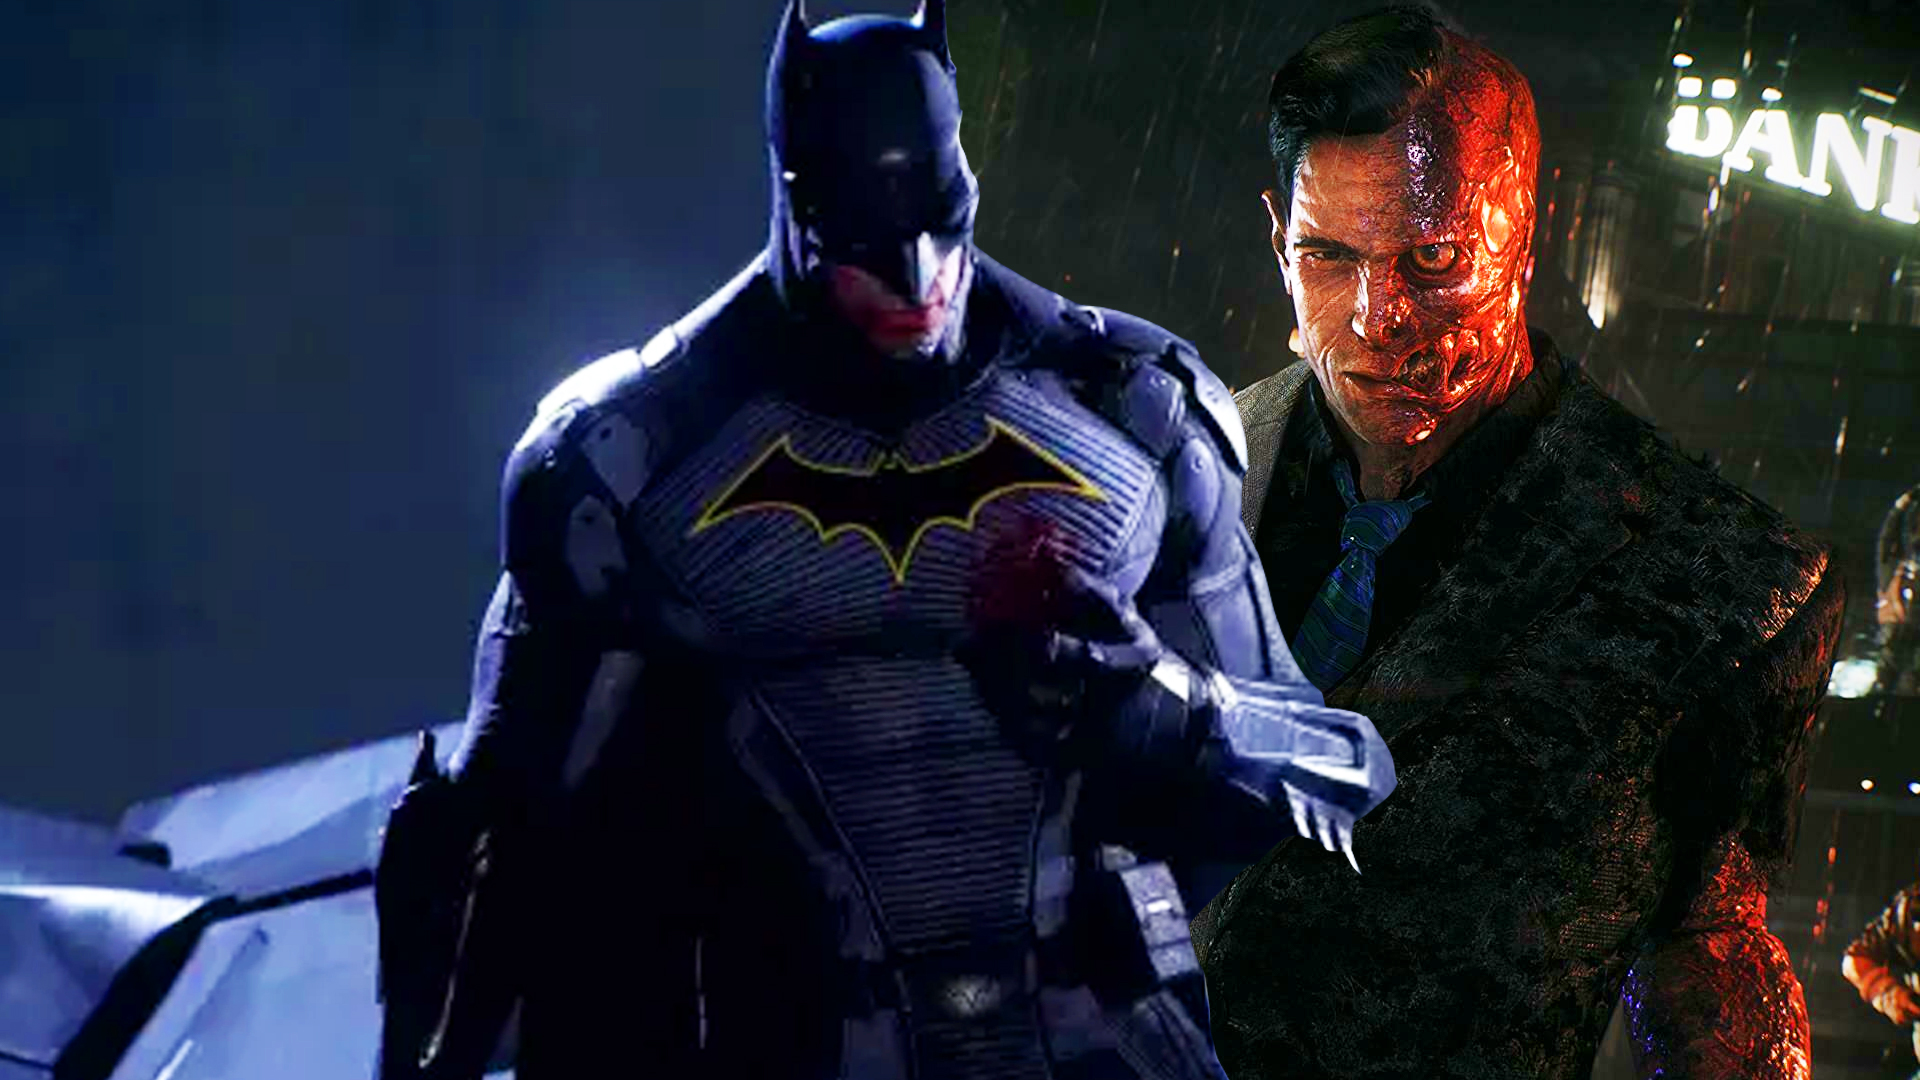 New Batman Gotham Knights game: Everything you need to know